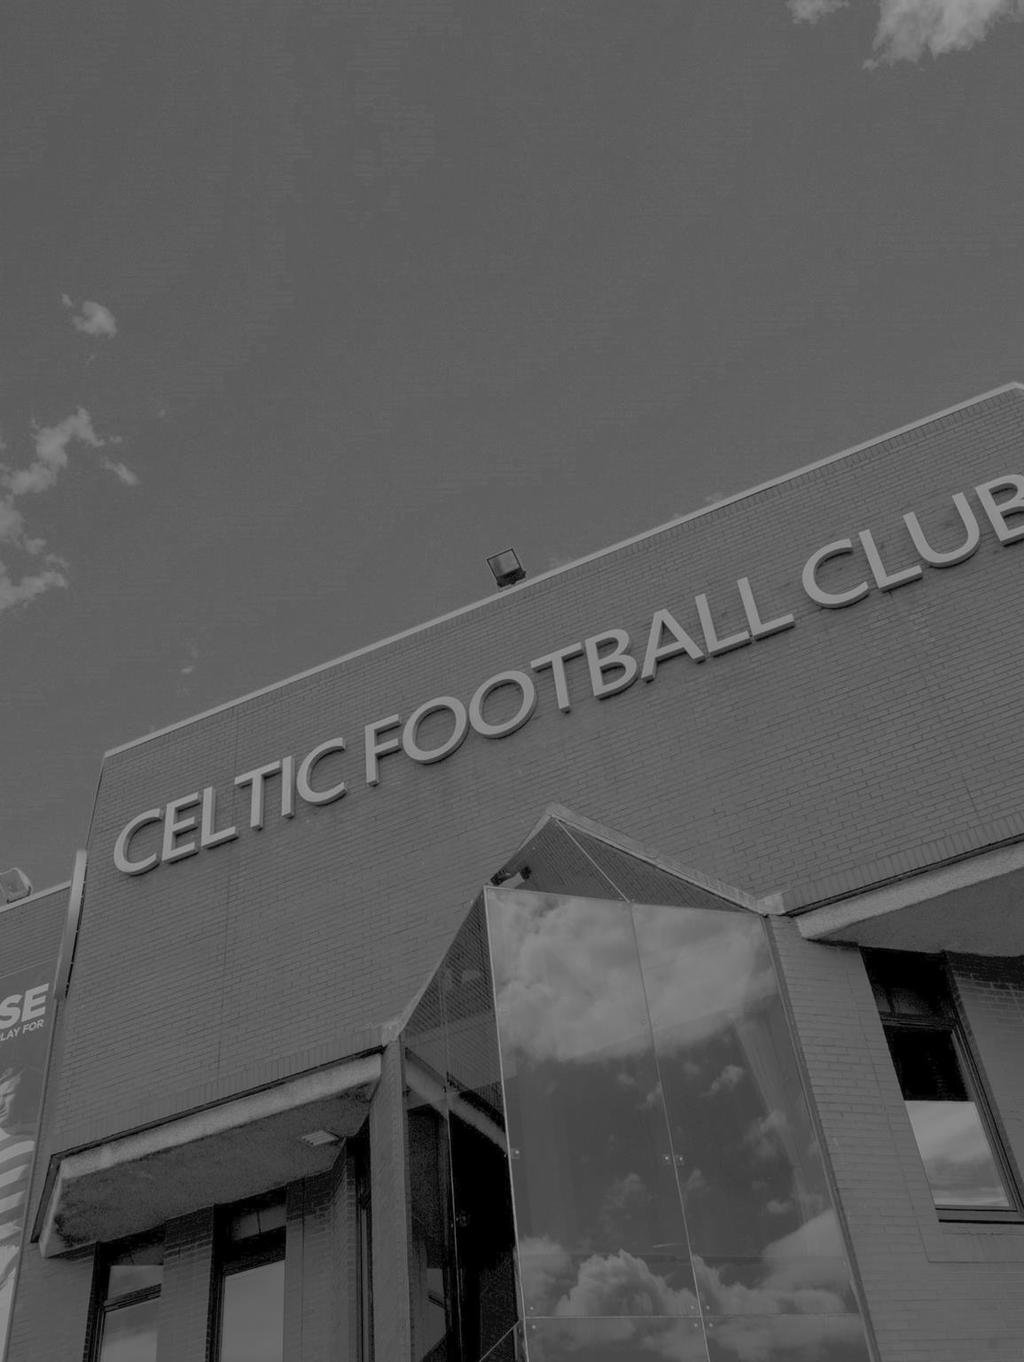 o r e w o r d Celtic ootball Club is proud of its history and the aims for which it was established.